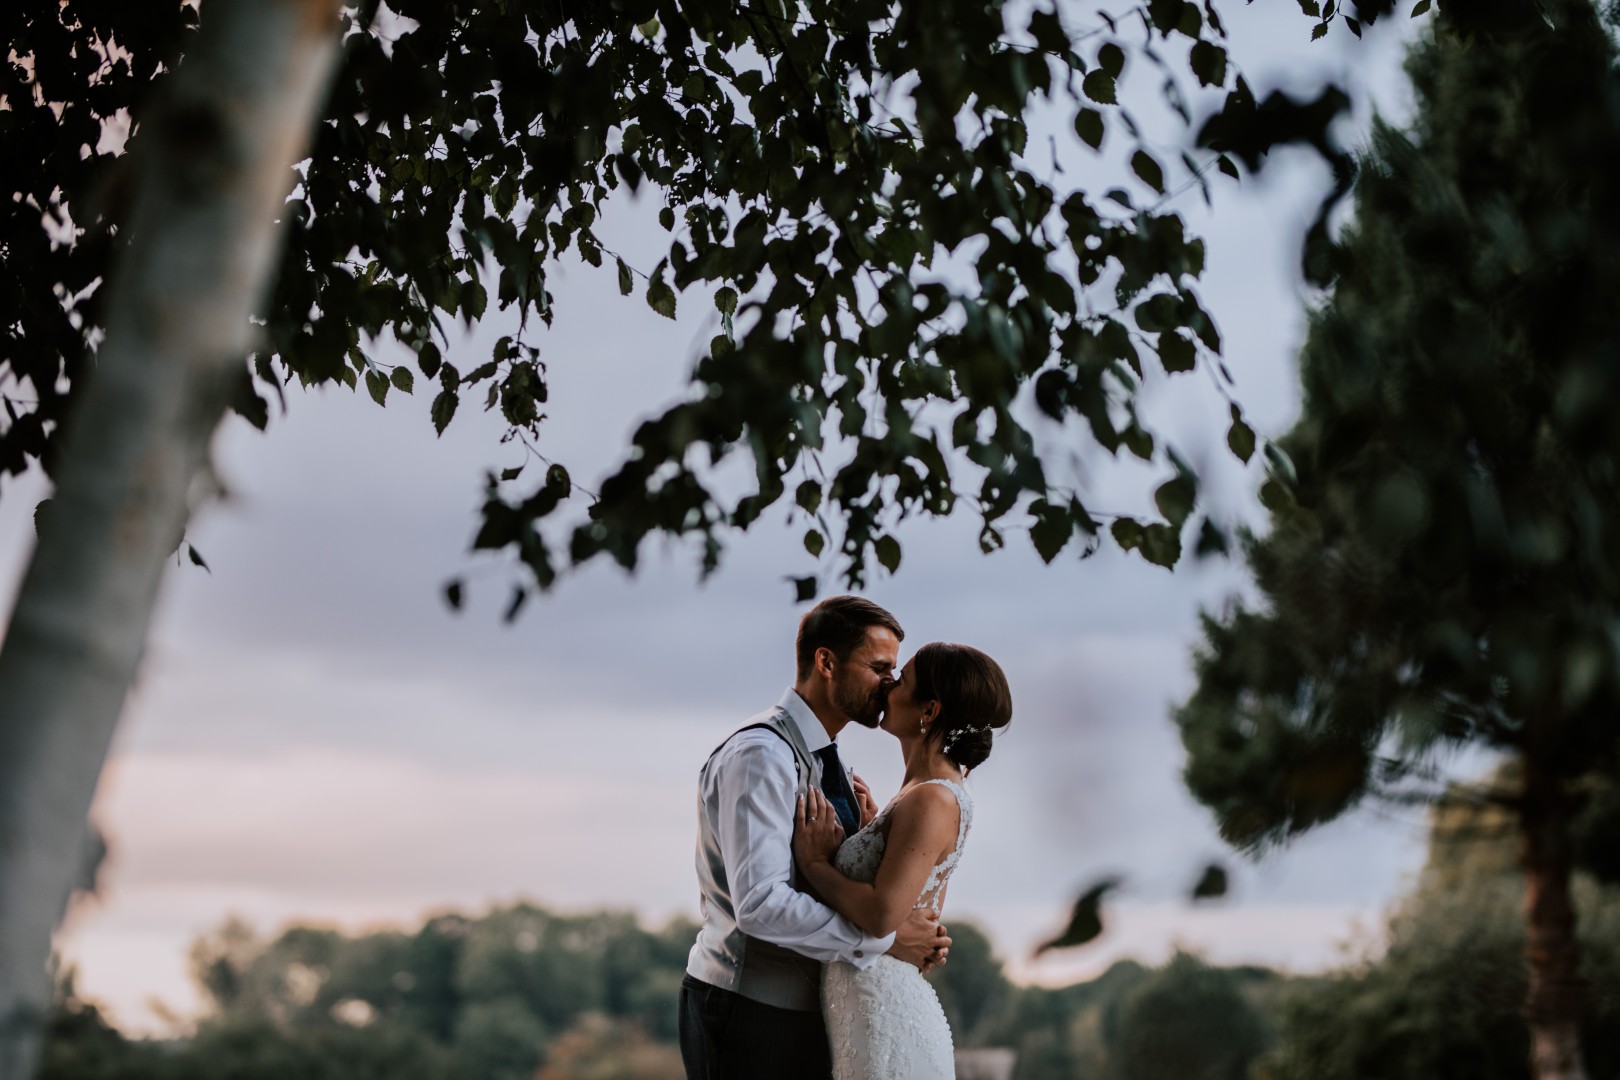 Struggling to find the right format to suit your special day? Why breaking the mould with a twilight wedding could be the perfect package